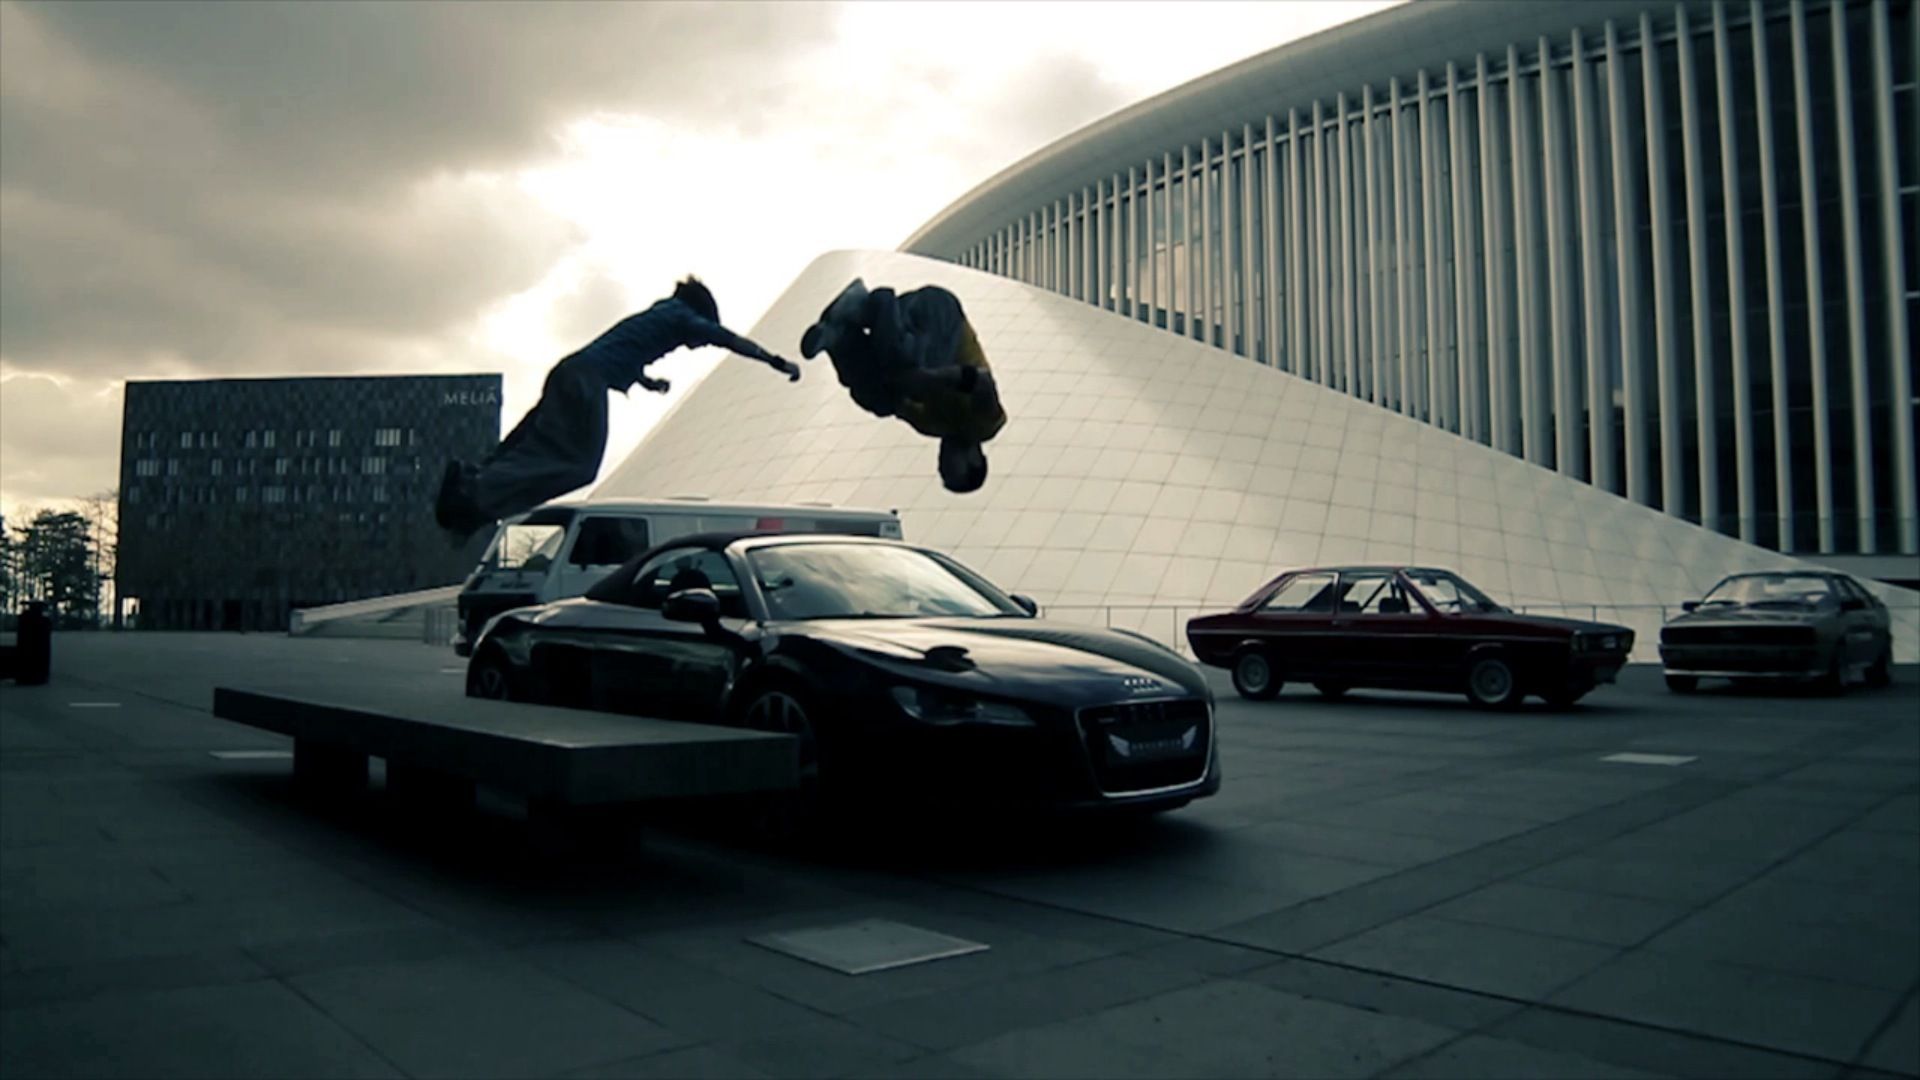 Parkour in the parking lot wallpapers and images - wallpapers